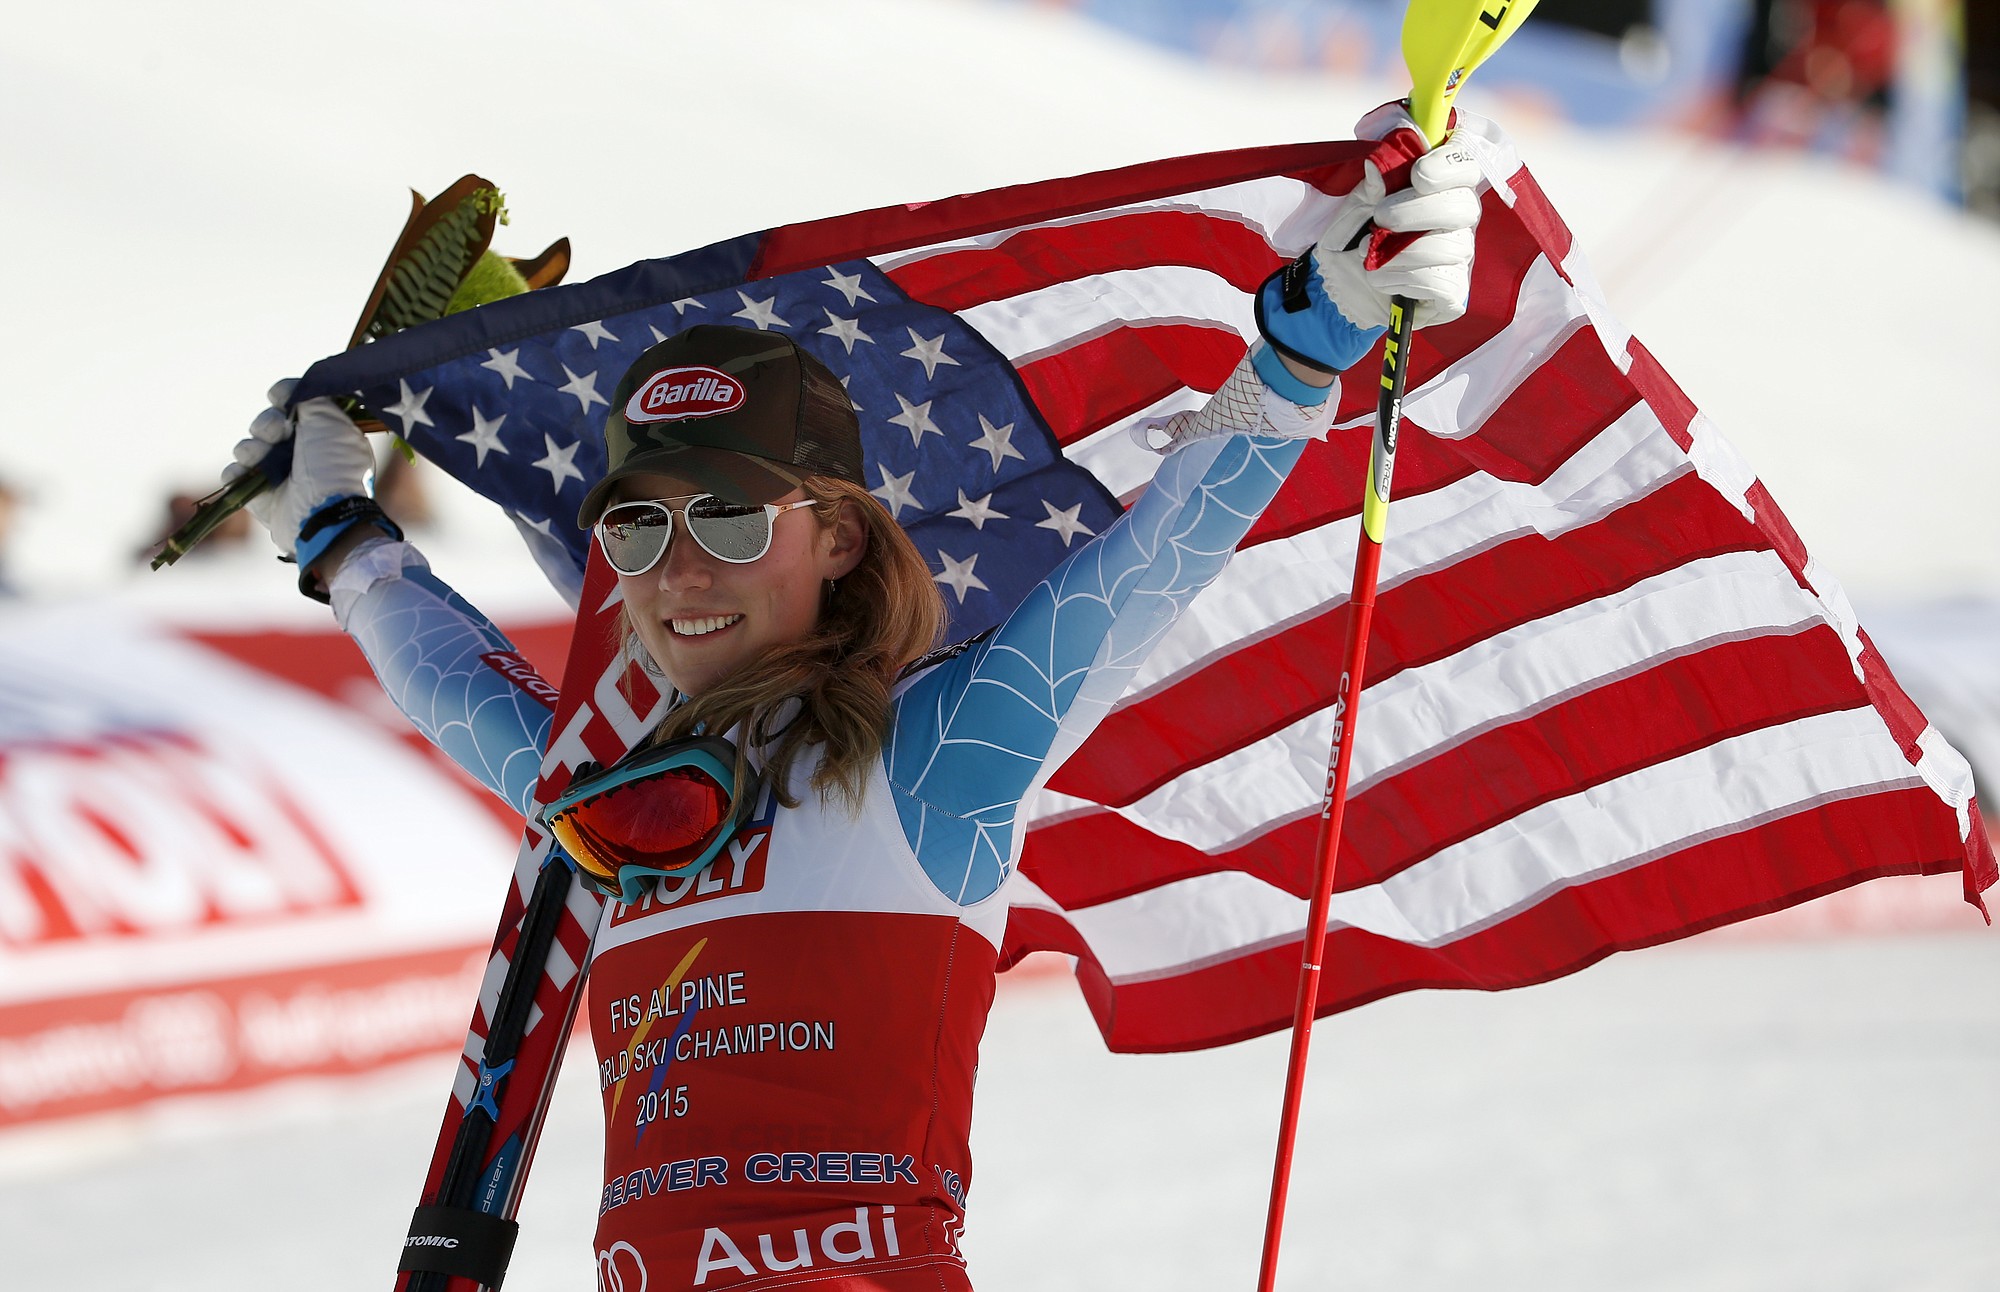 United States' Mikaela Shiffrin celebrates her win in the women's slalom competition at the Alpine skiing world championships on Saturday, Feb. 14, 2015, in Beaver Creek, Colo.